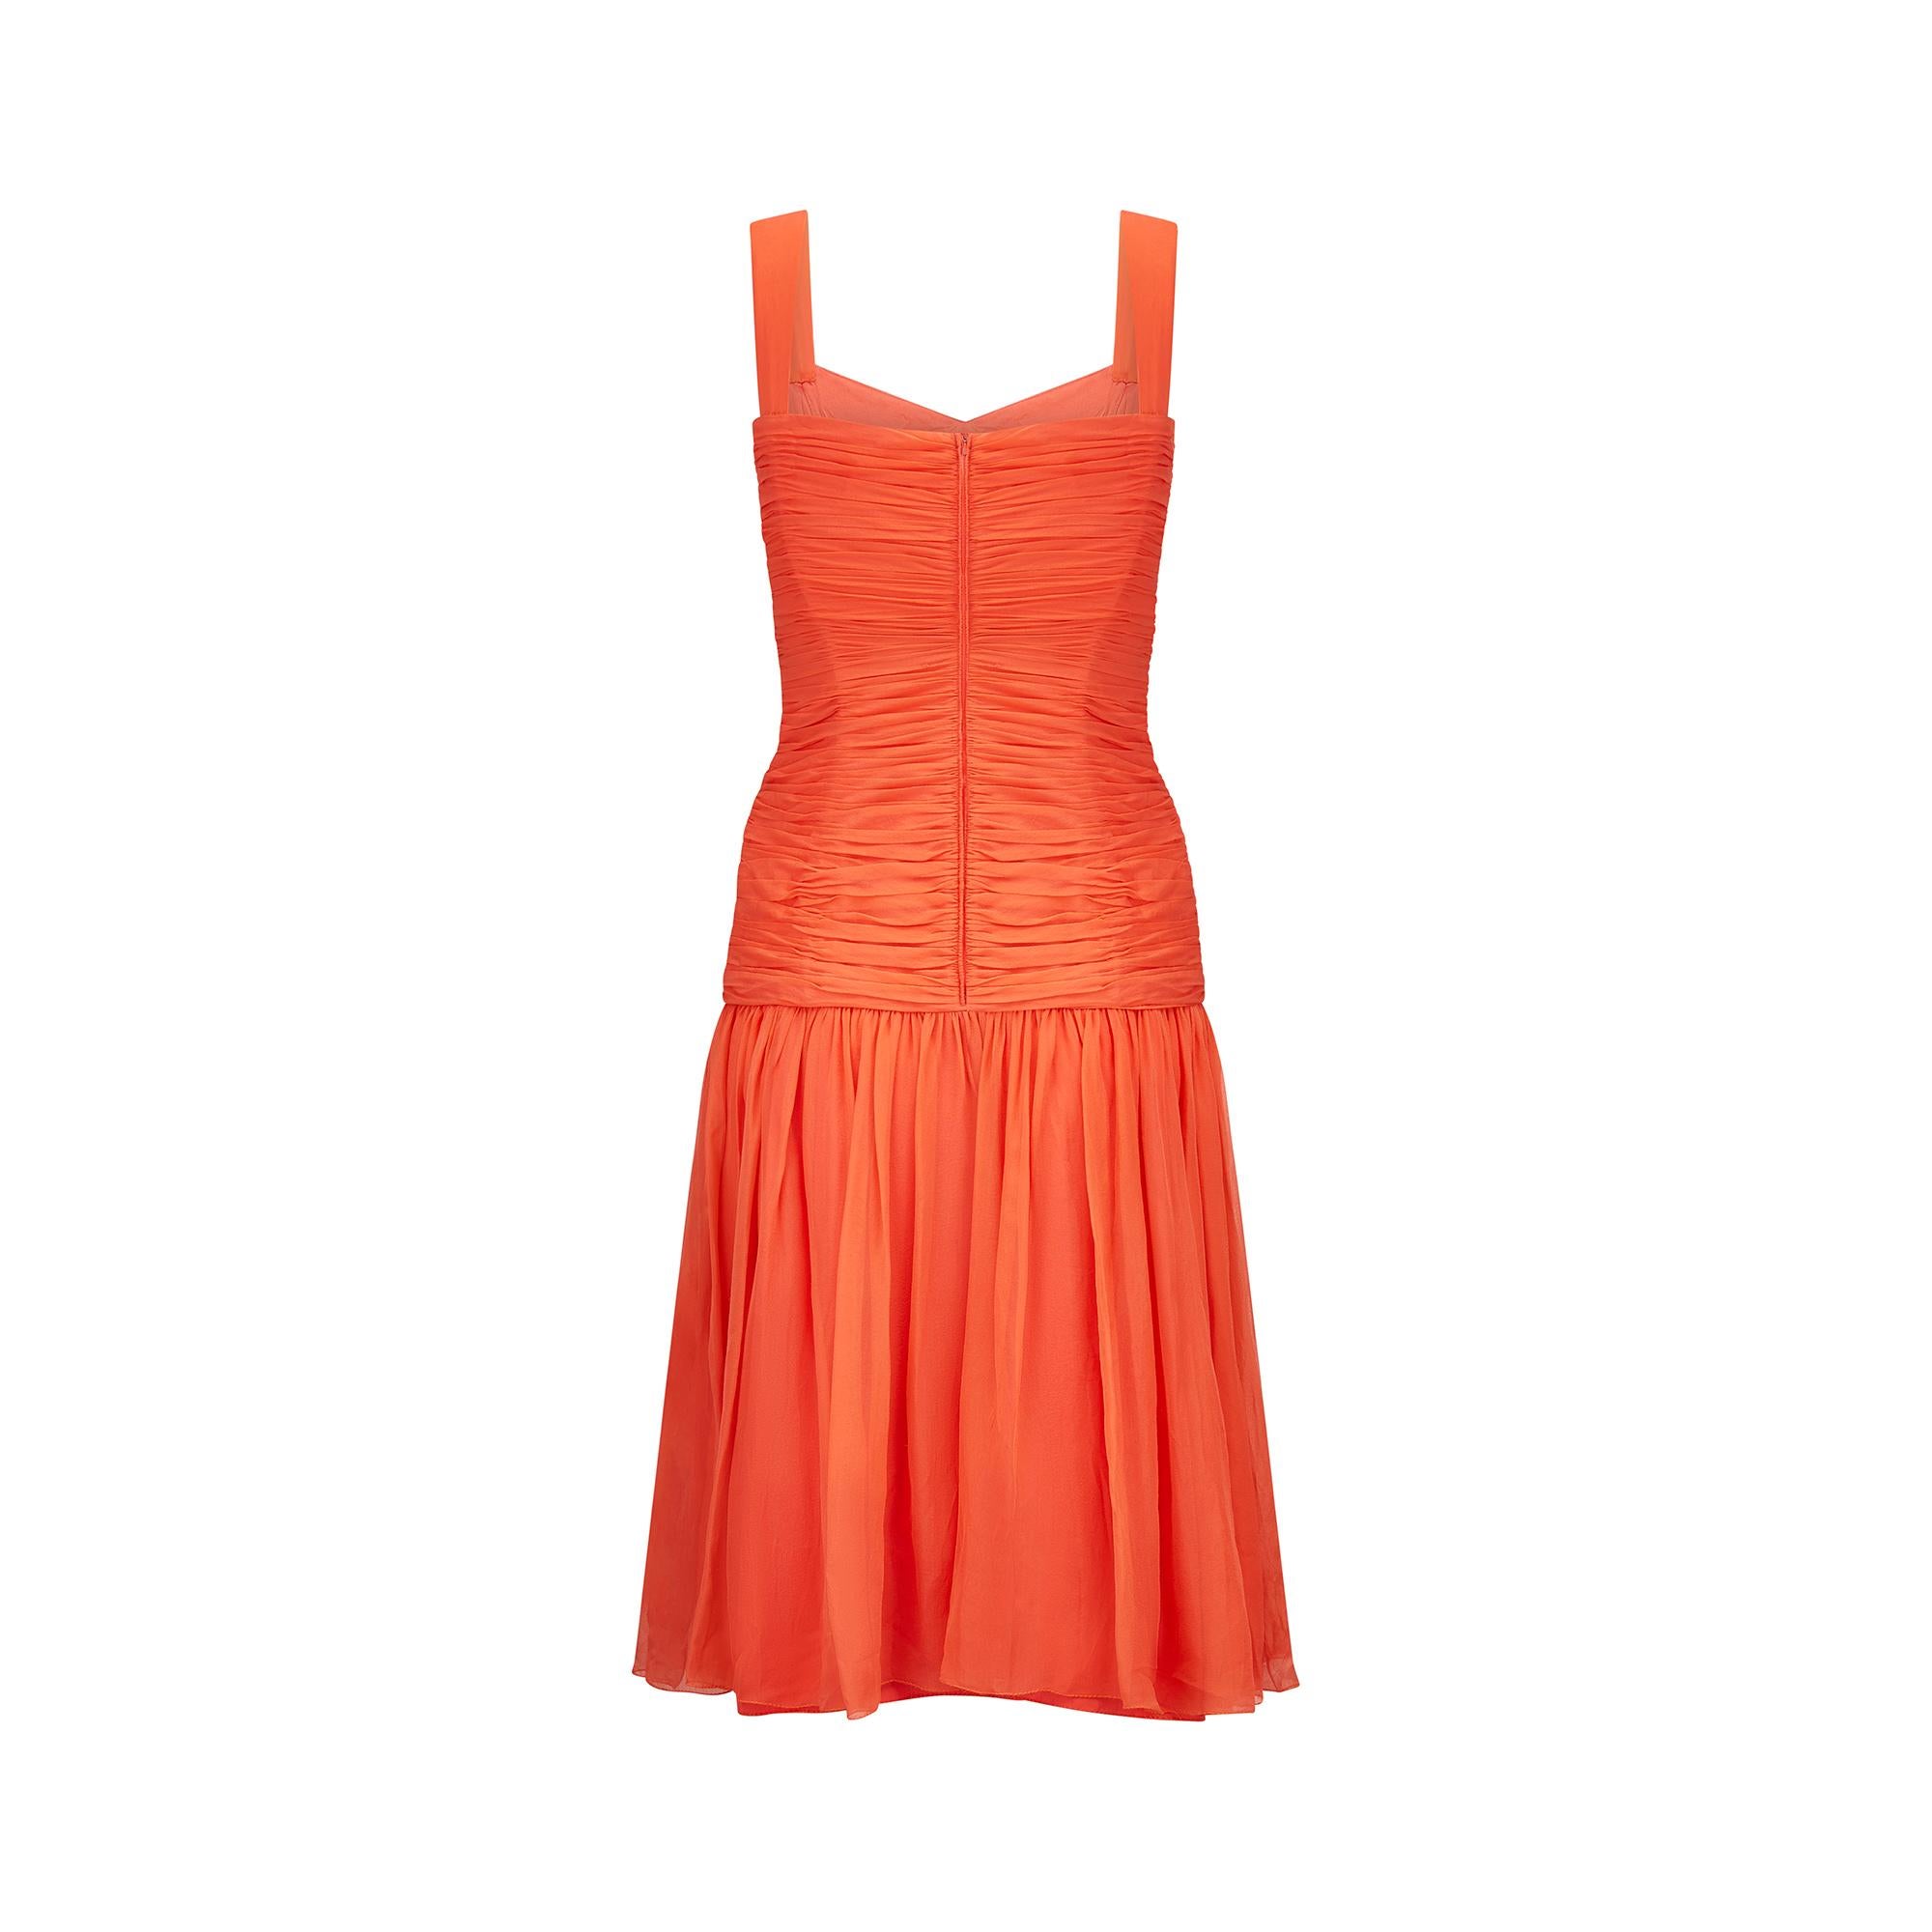 1980s Louis Feraud Orange Silk Crepe Dress In Excellent Condition For Sale In London, GB